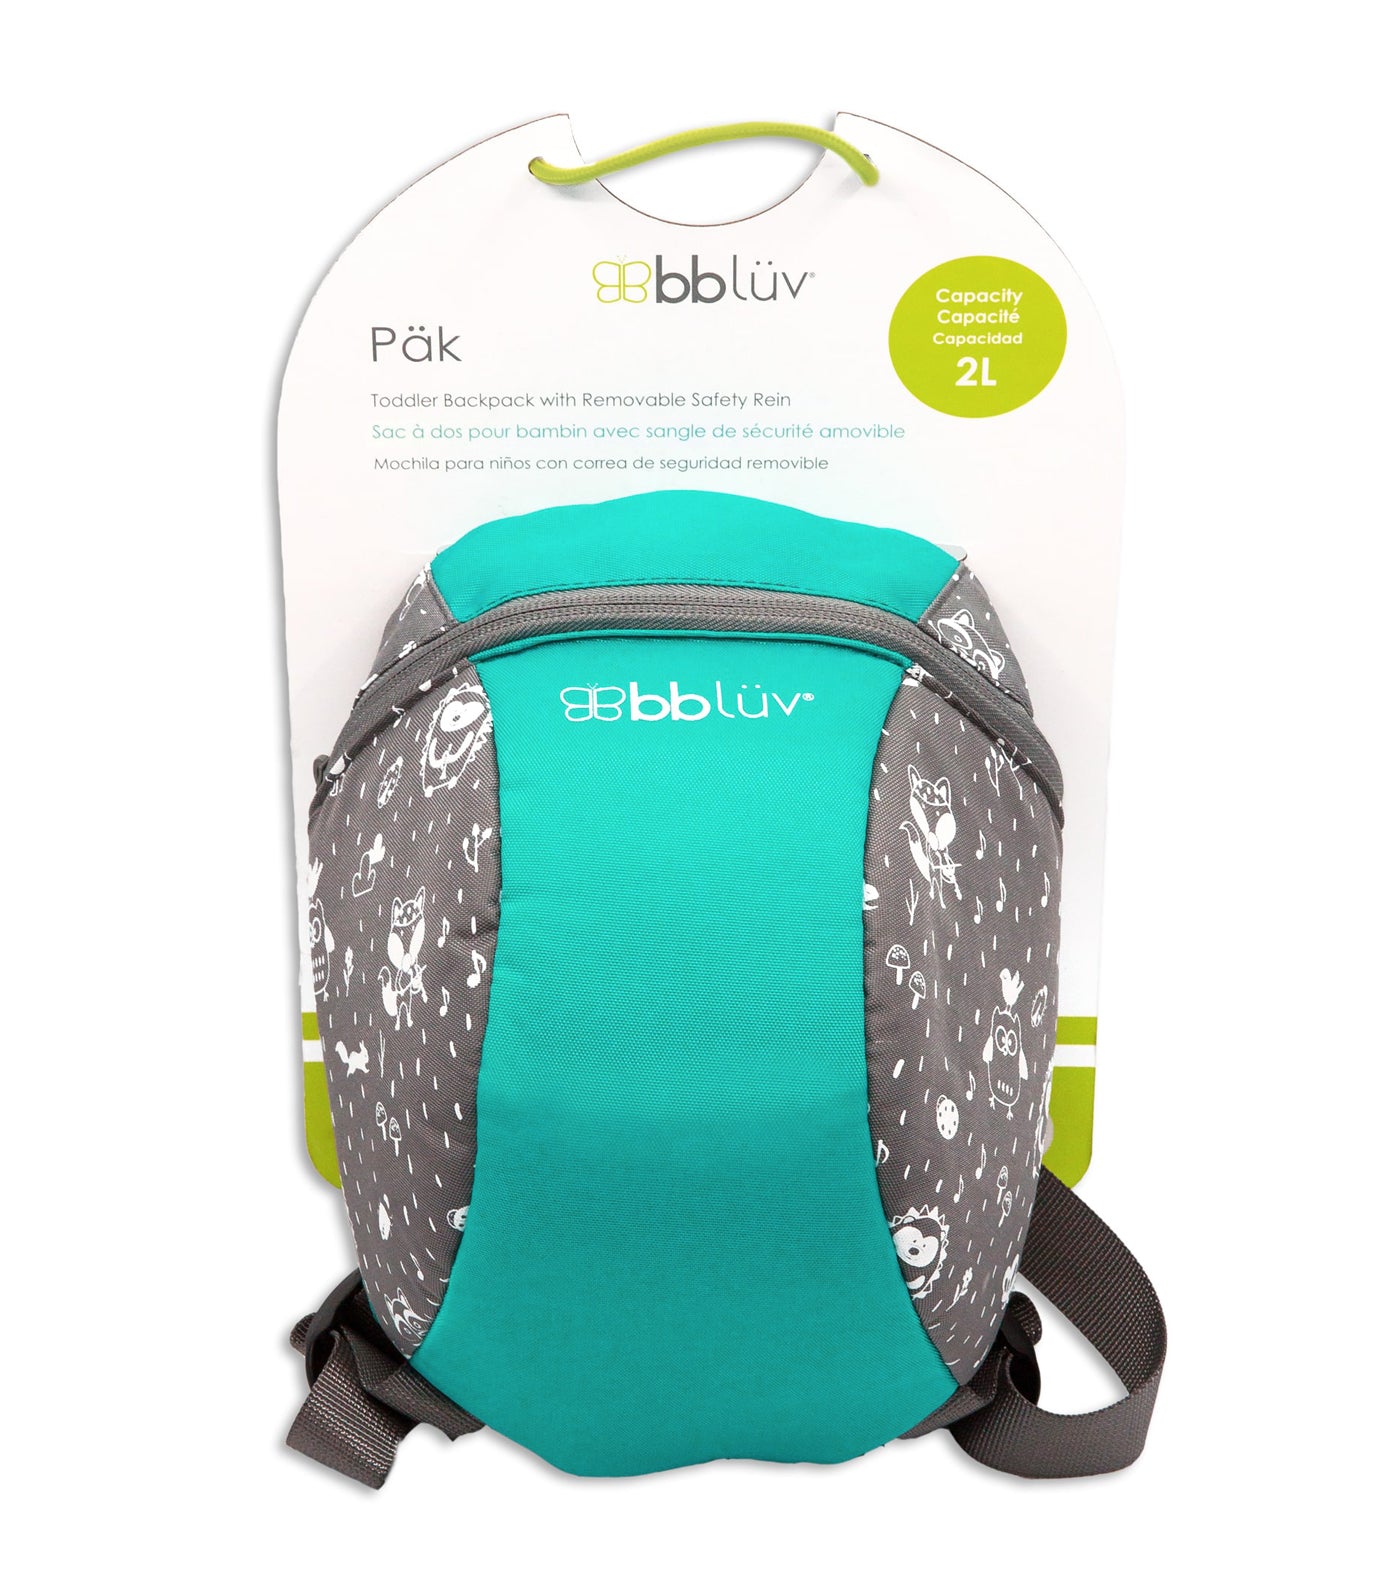 Päk: Toddler Mini Backpack With Safety Reins - Aqua